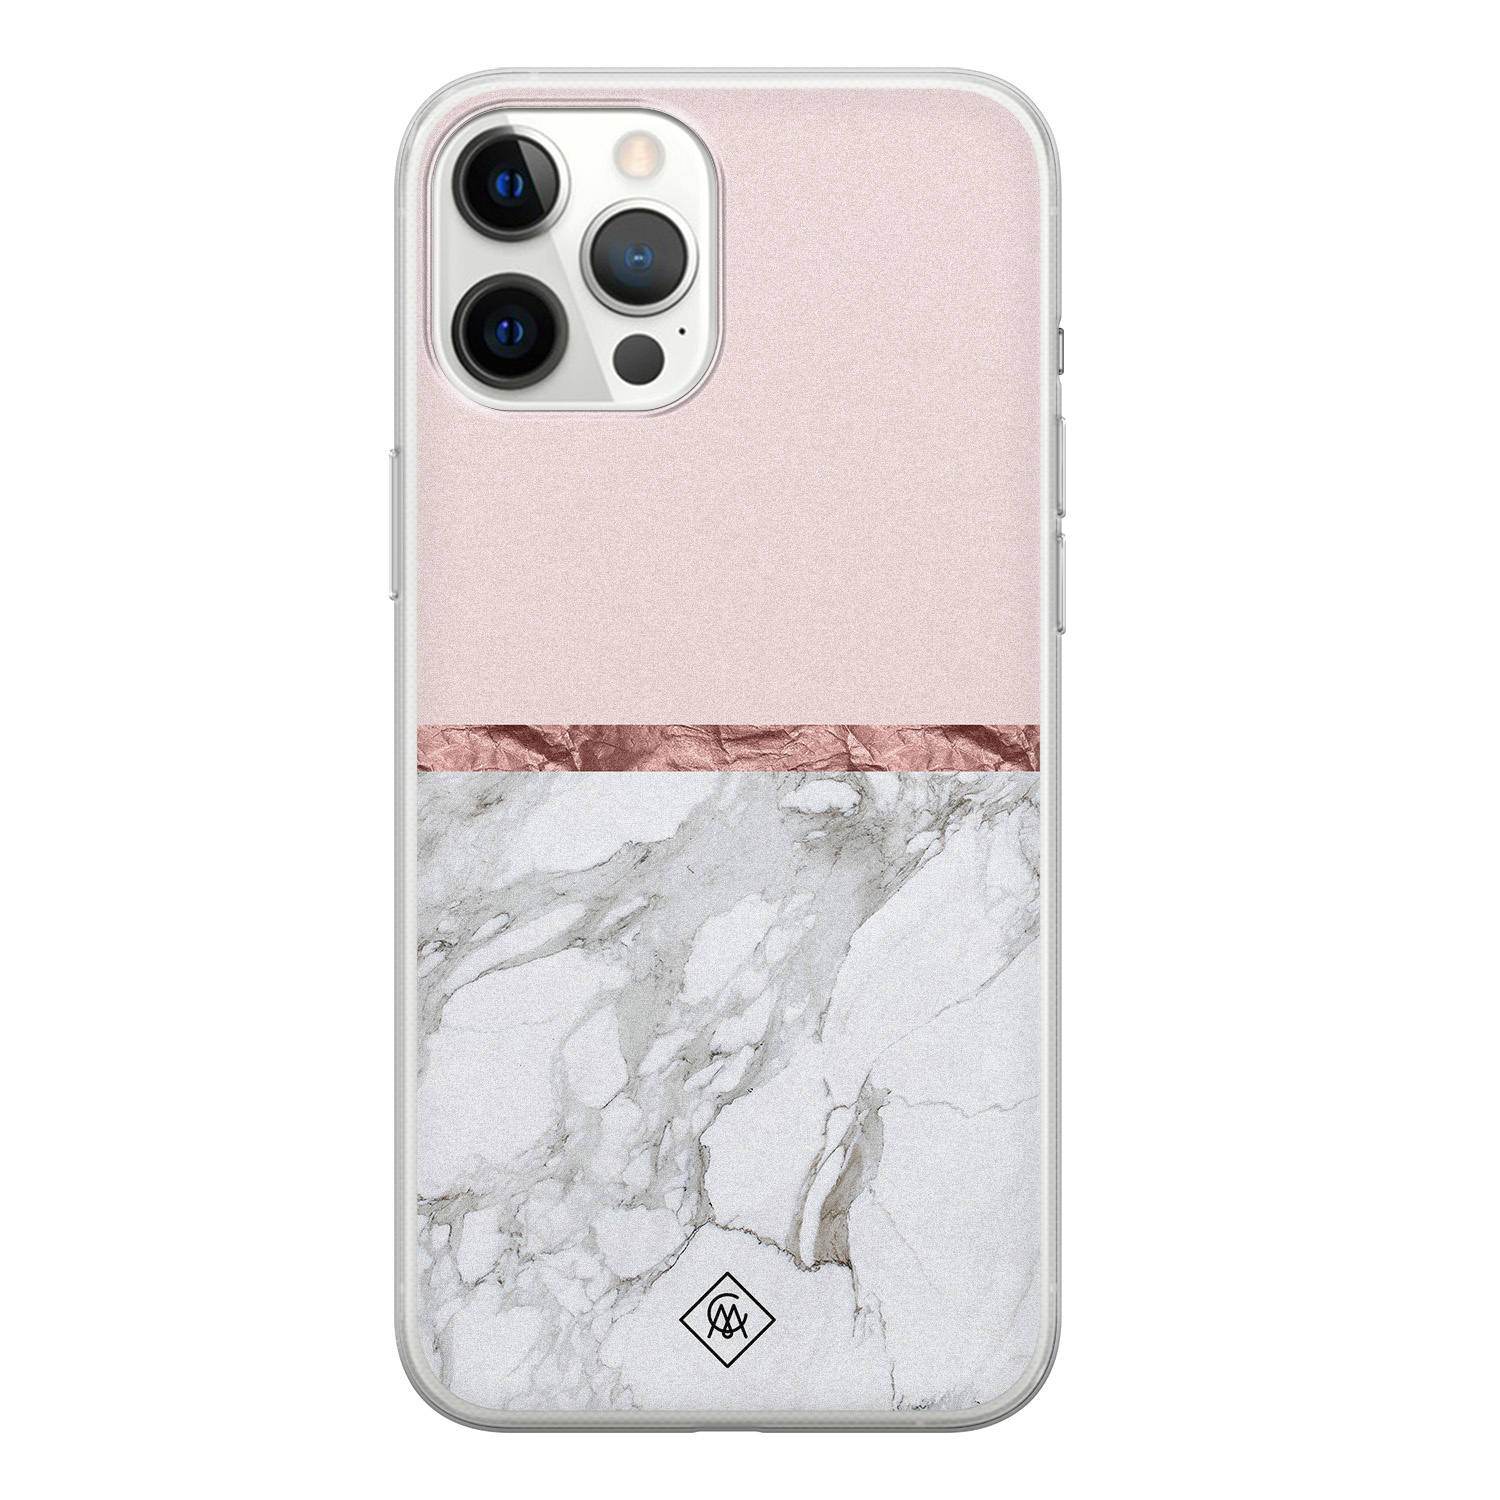 iPhone 12 Pro Max siliconen telefoonhoesje - Rose all day